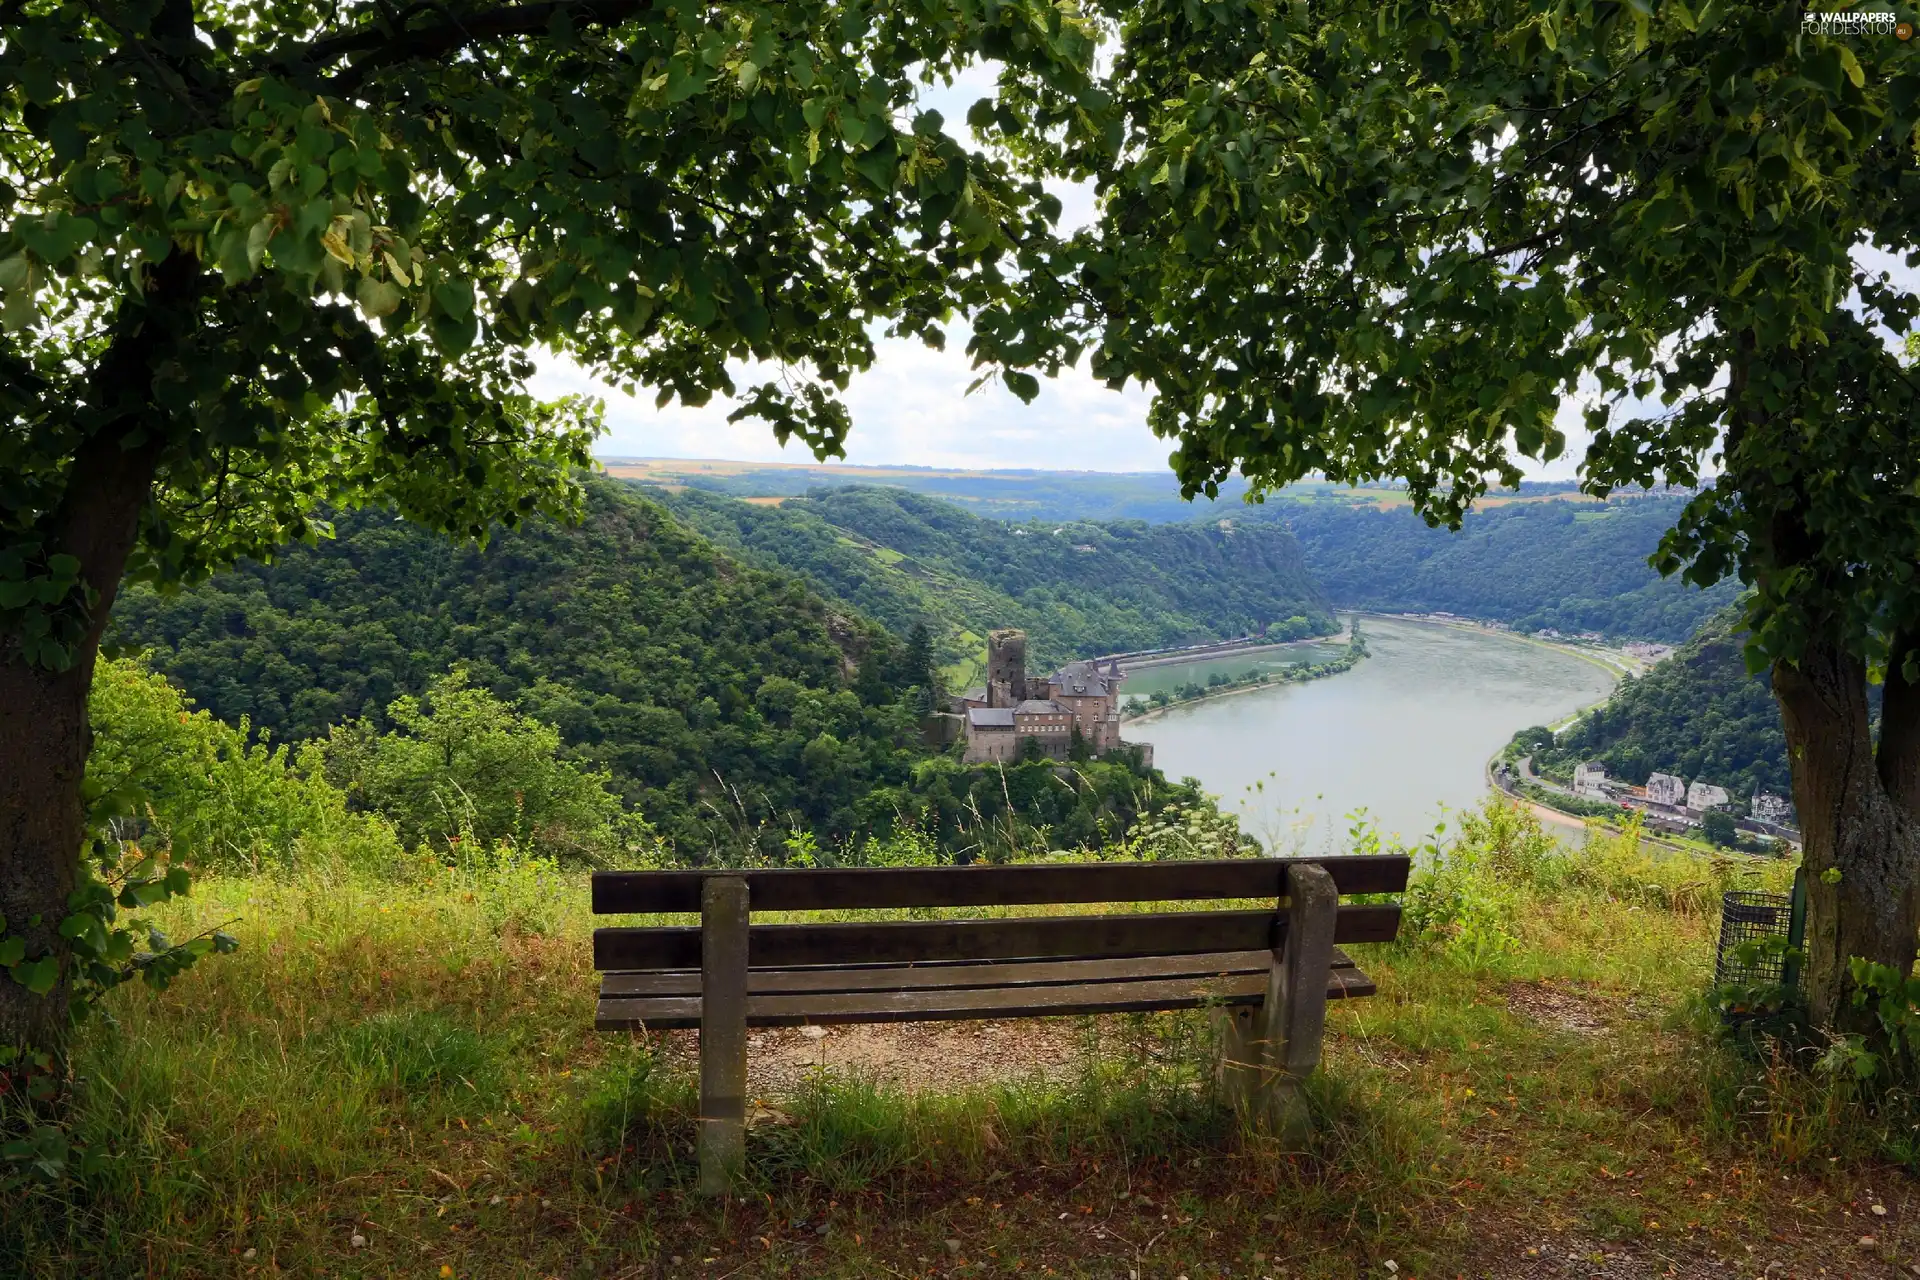 viewes, Bench, Mountains, trees, River